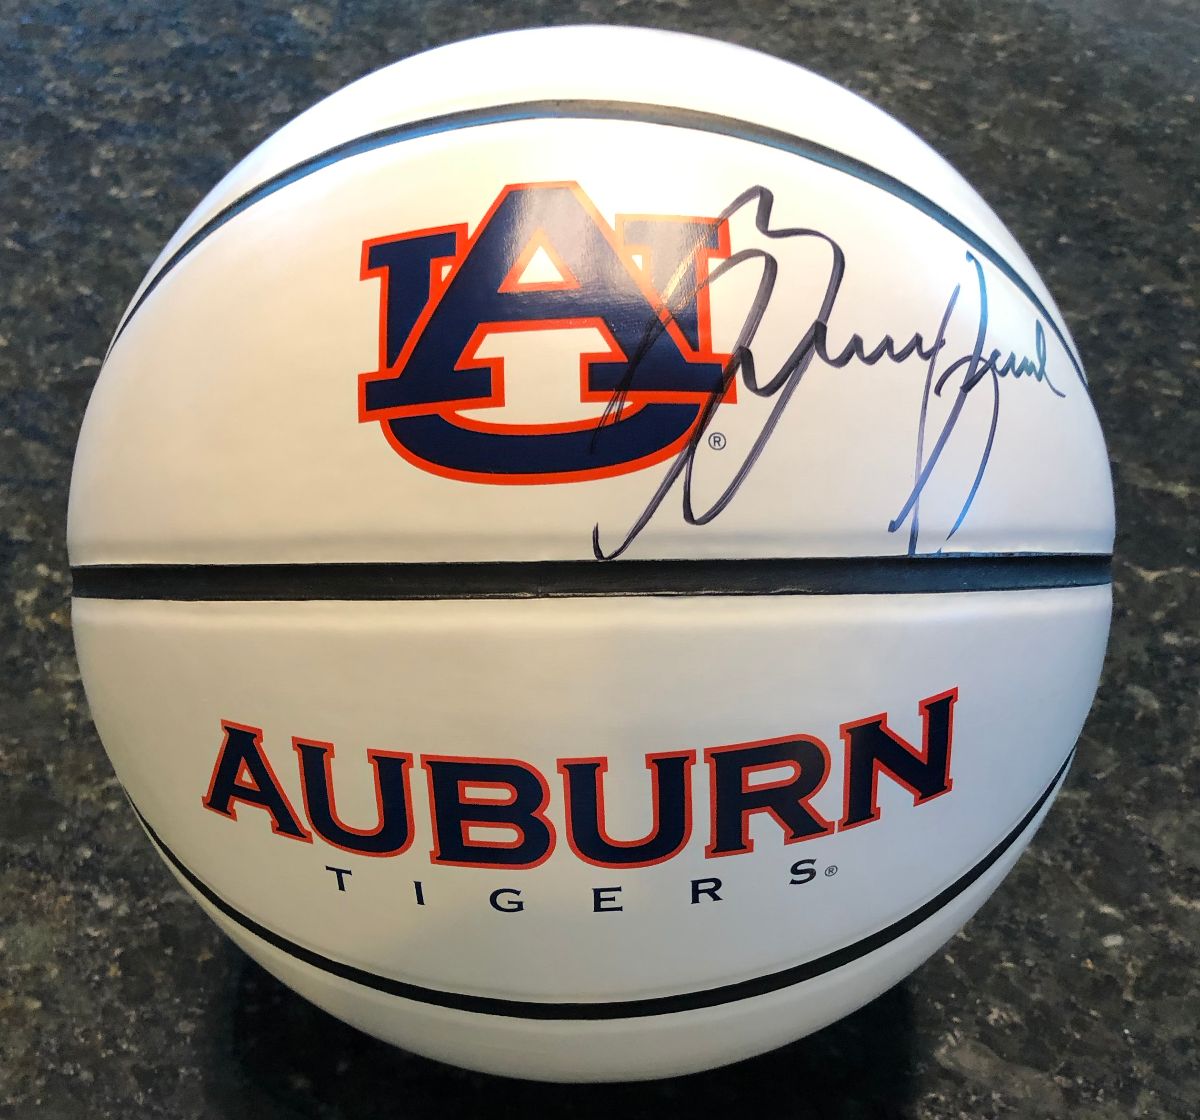 Coach Bruce Pearl led Auburn to the Final Four for the First Time in 2019! We have Bruce Pearl autographed Auburn Tigers logo basketballs! - mailchi.mp/nikcosports.co… #CoachPearl #AuburnBasketball